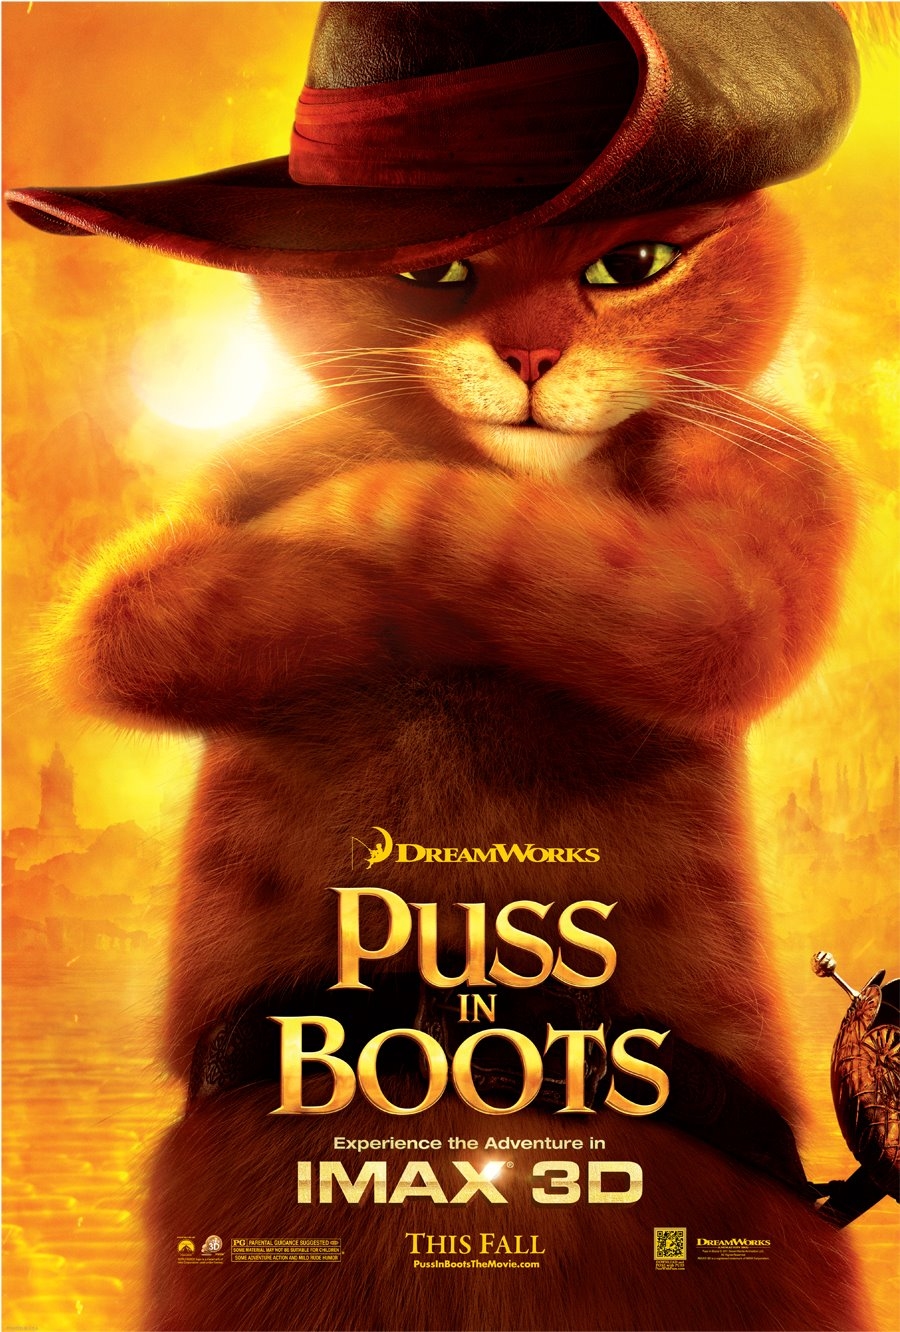 puss in boots wii